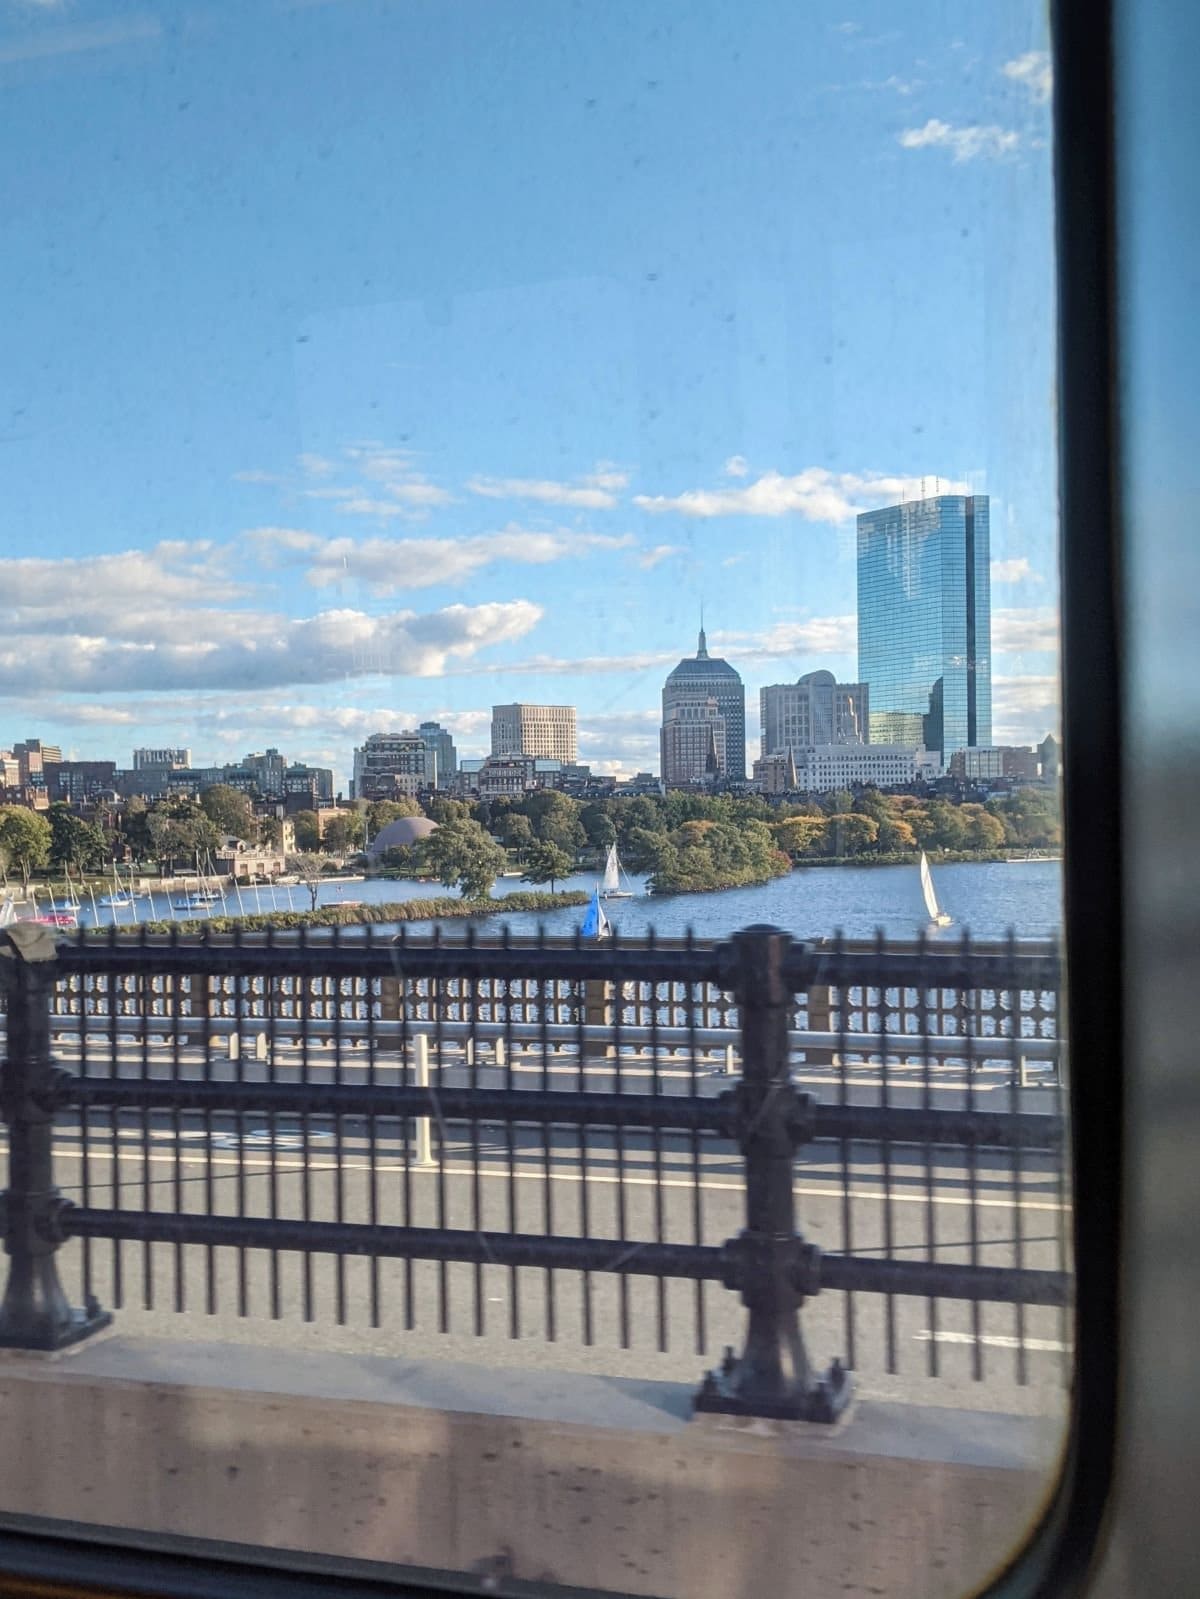 Boston skyline from the window of the Red Line